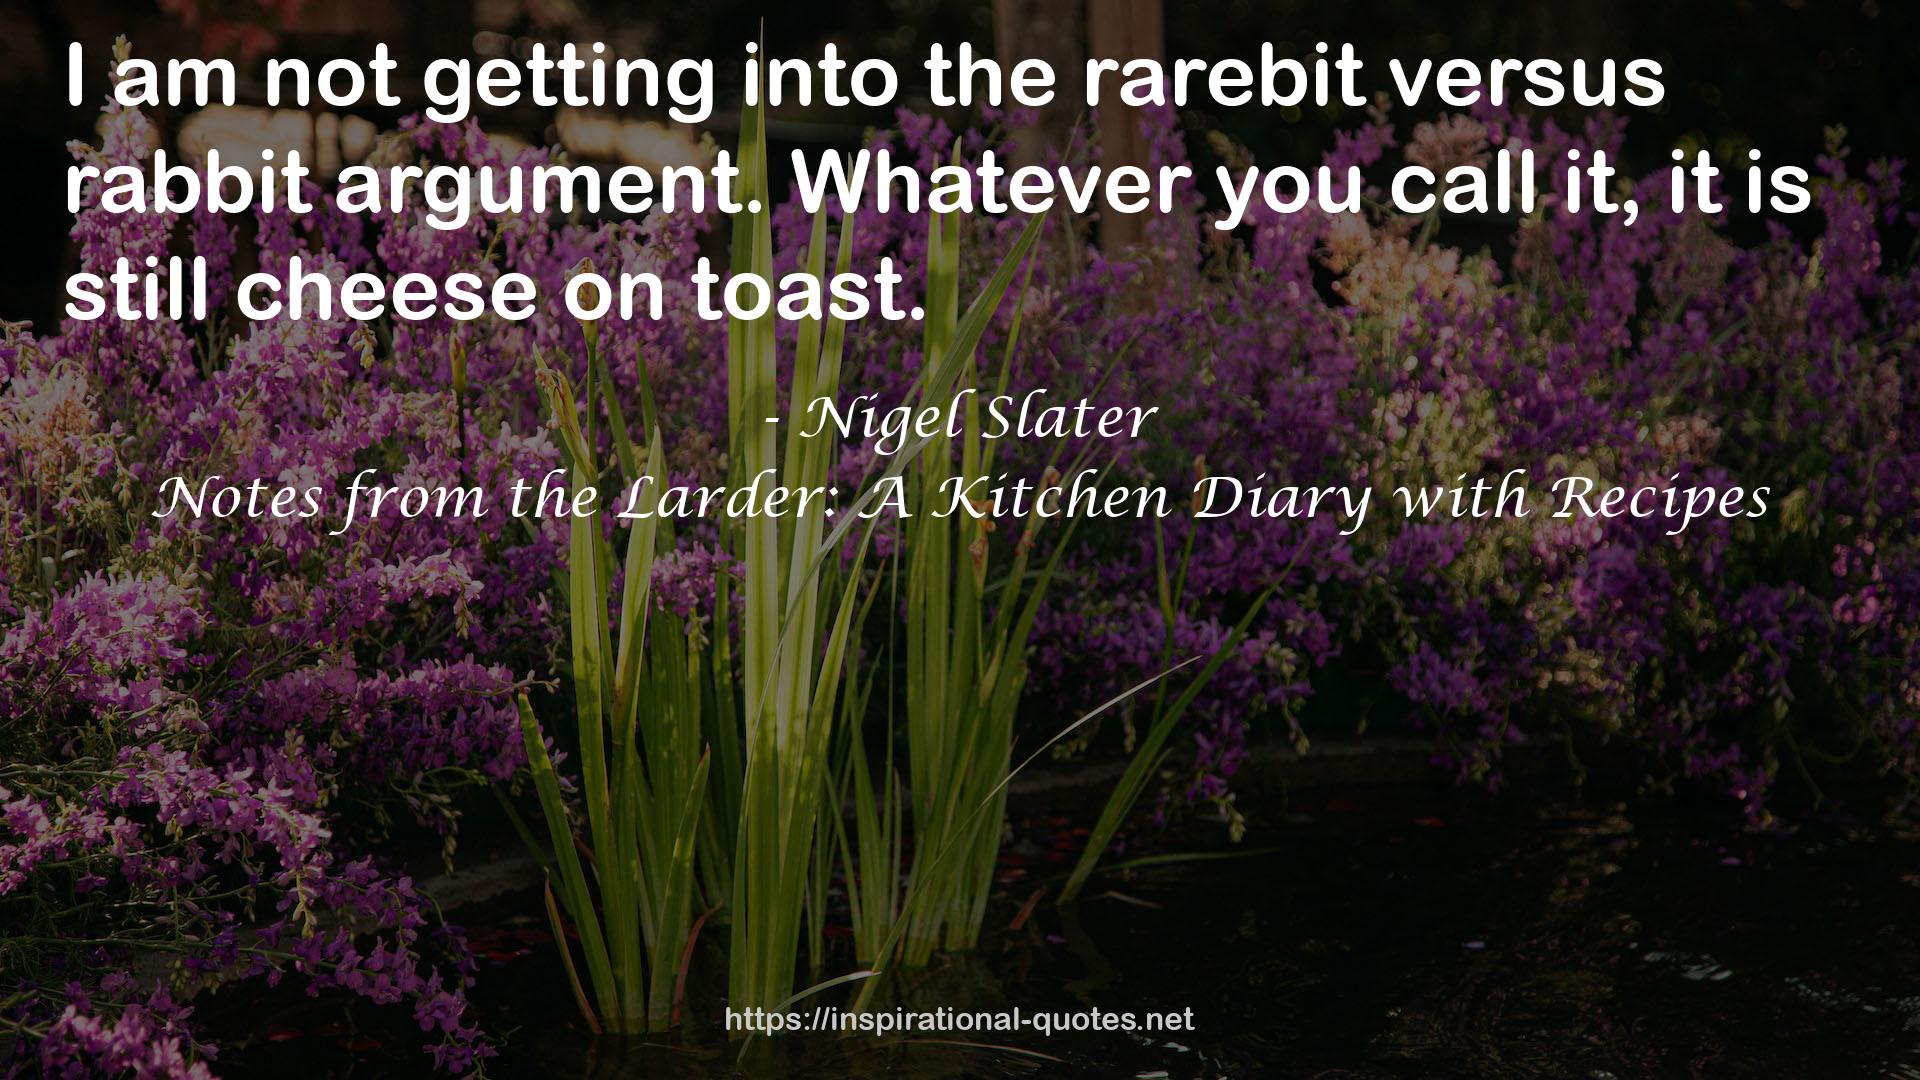 Notes from the Larder: A Kitchen Diary with Recipes QUOTES